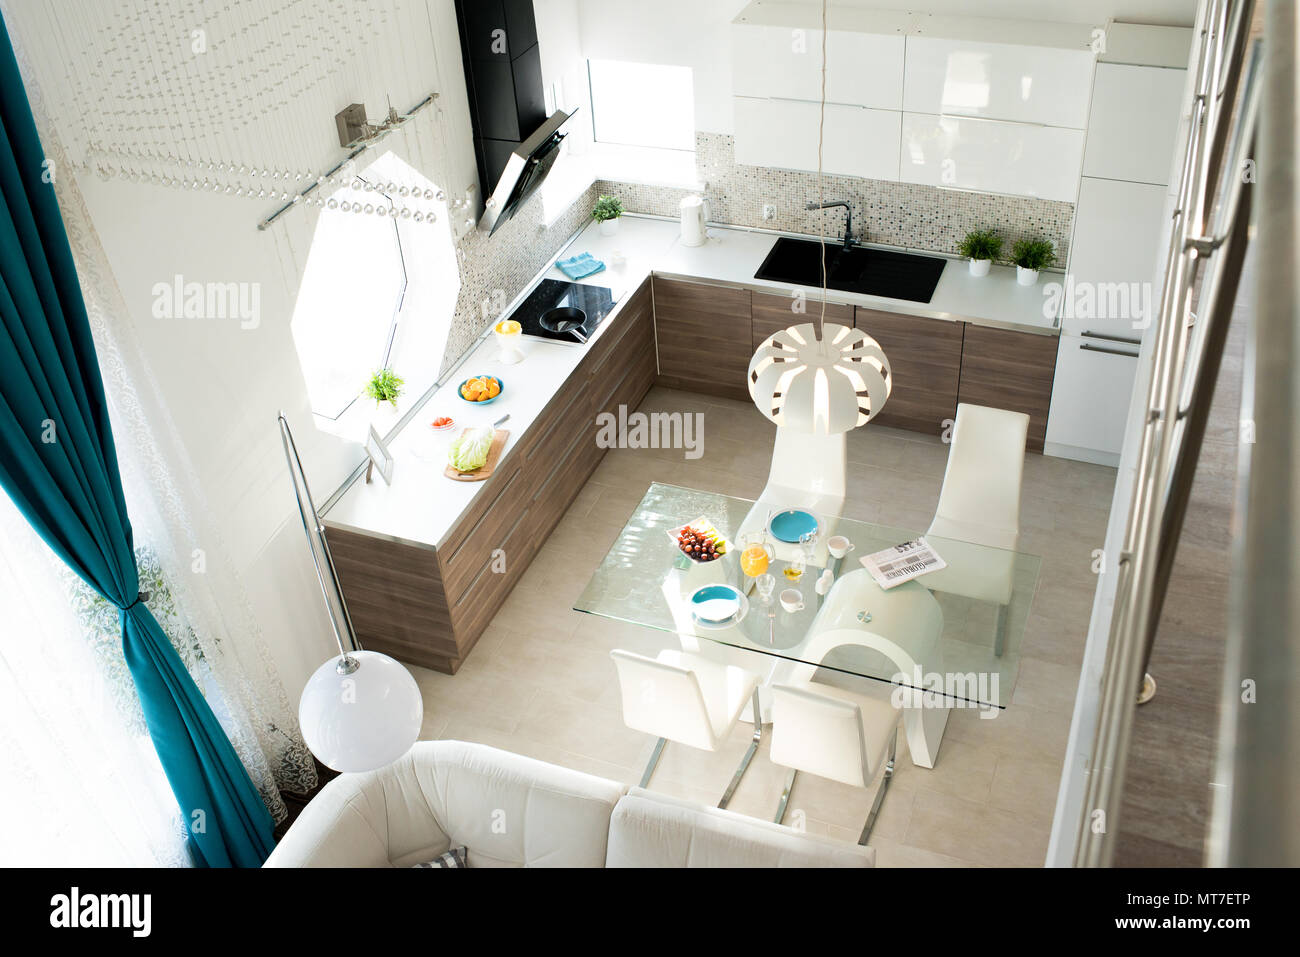 Comfortable contemporary kitchen and dining area Stock Photo